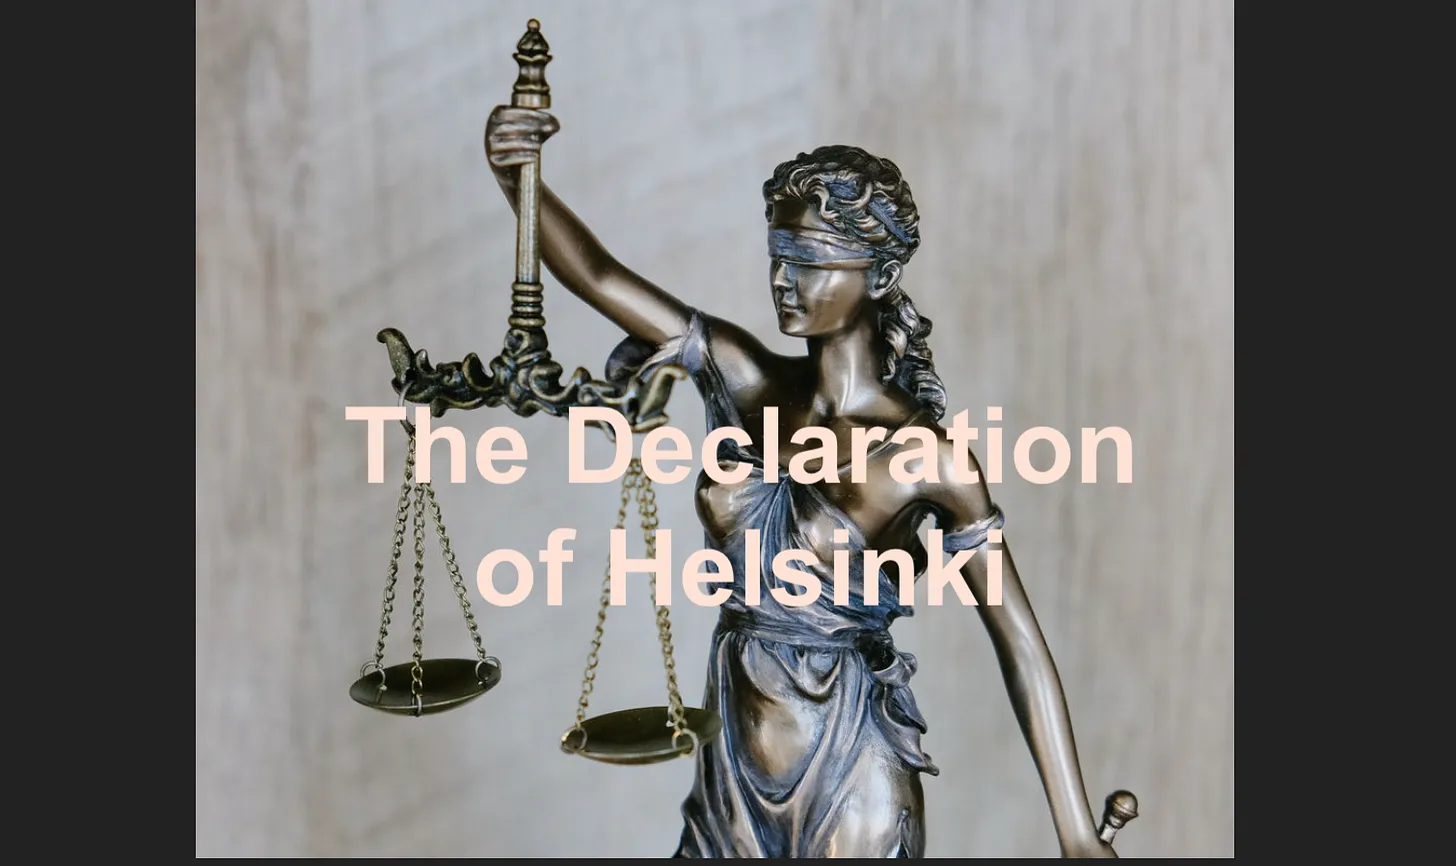 Dr. Robert Malone: The Declaration of Helsinki- what does it actually say and was it followed during COVID-19?